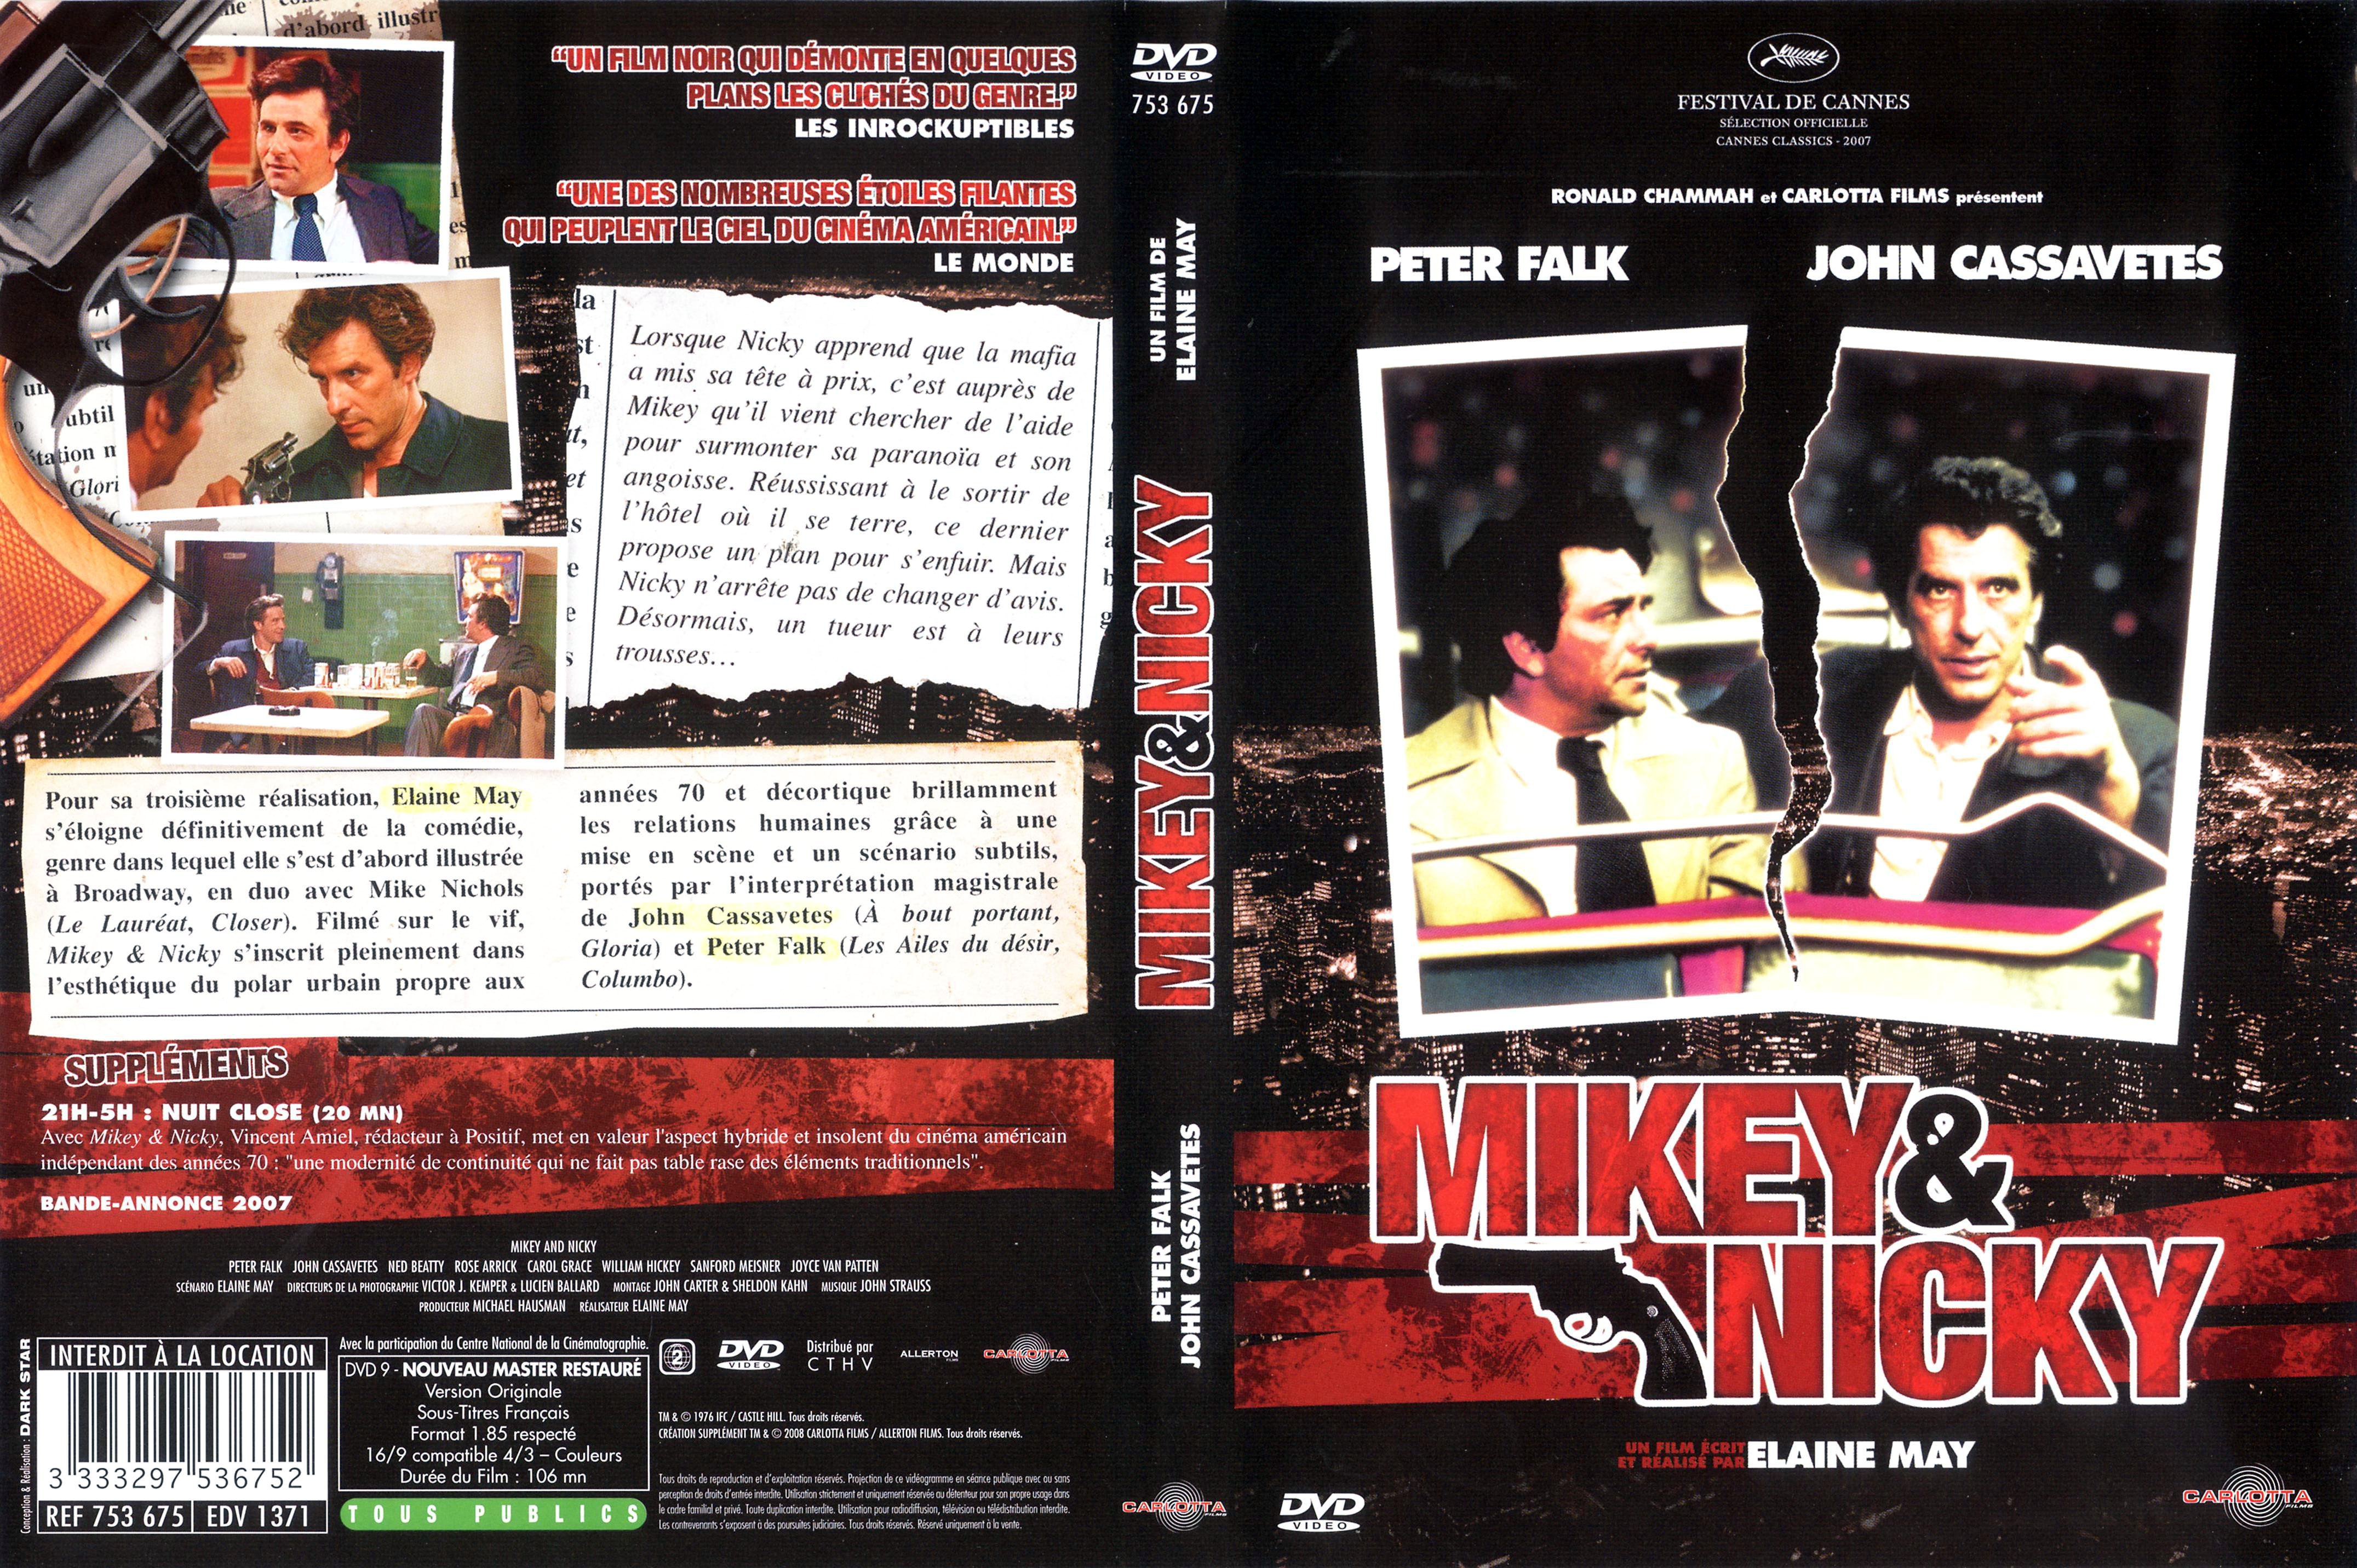 Jaquette DVD Mikey & Nicky